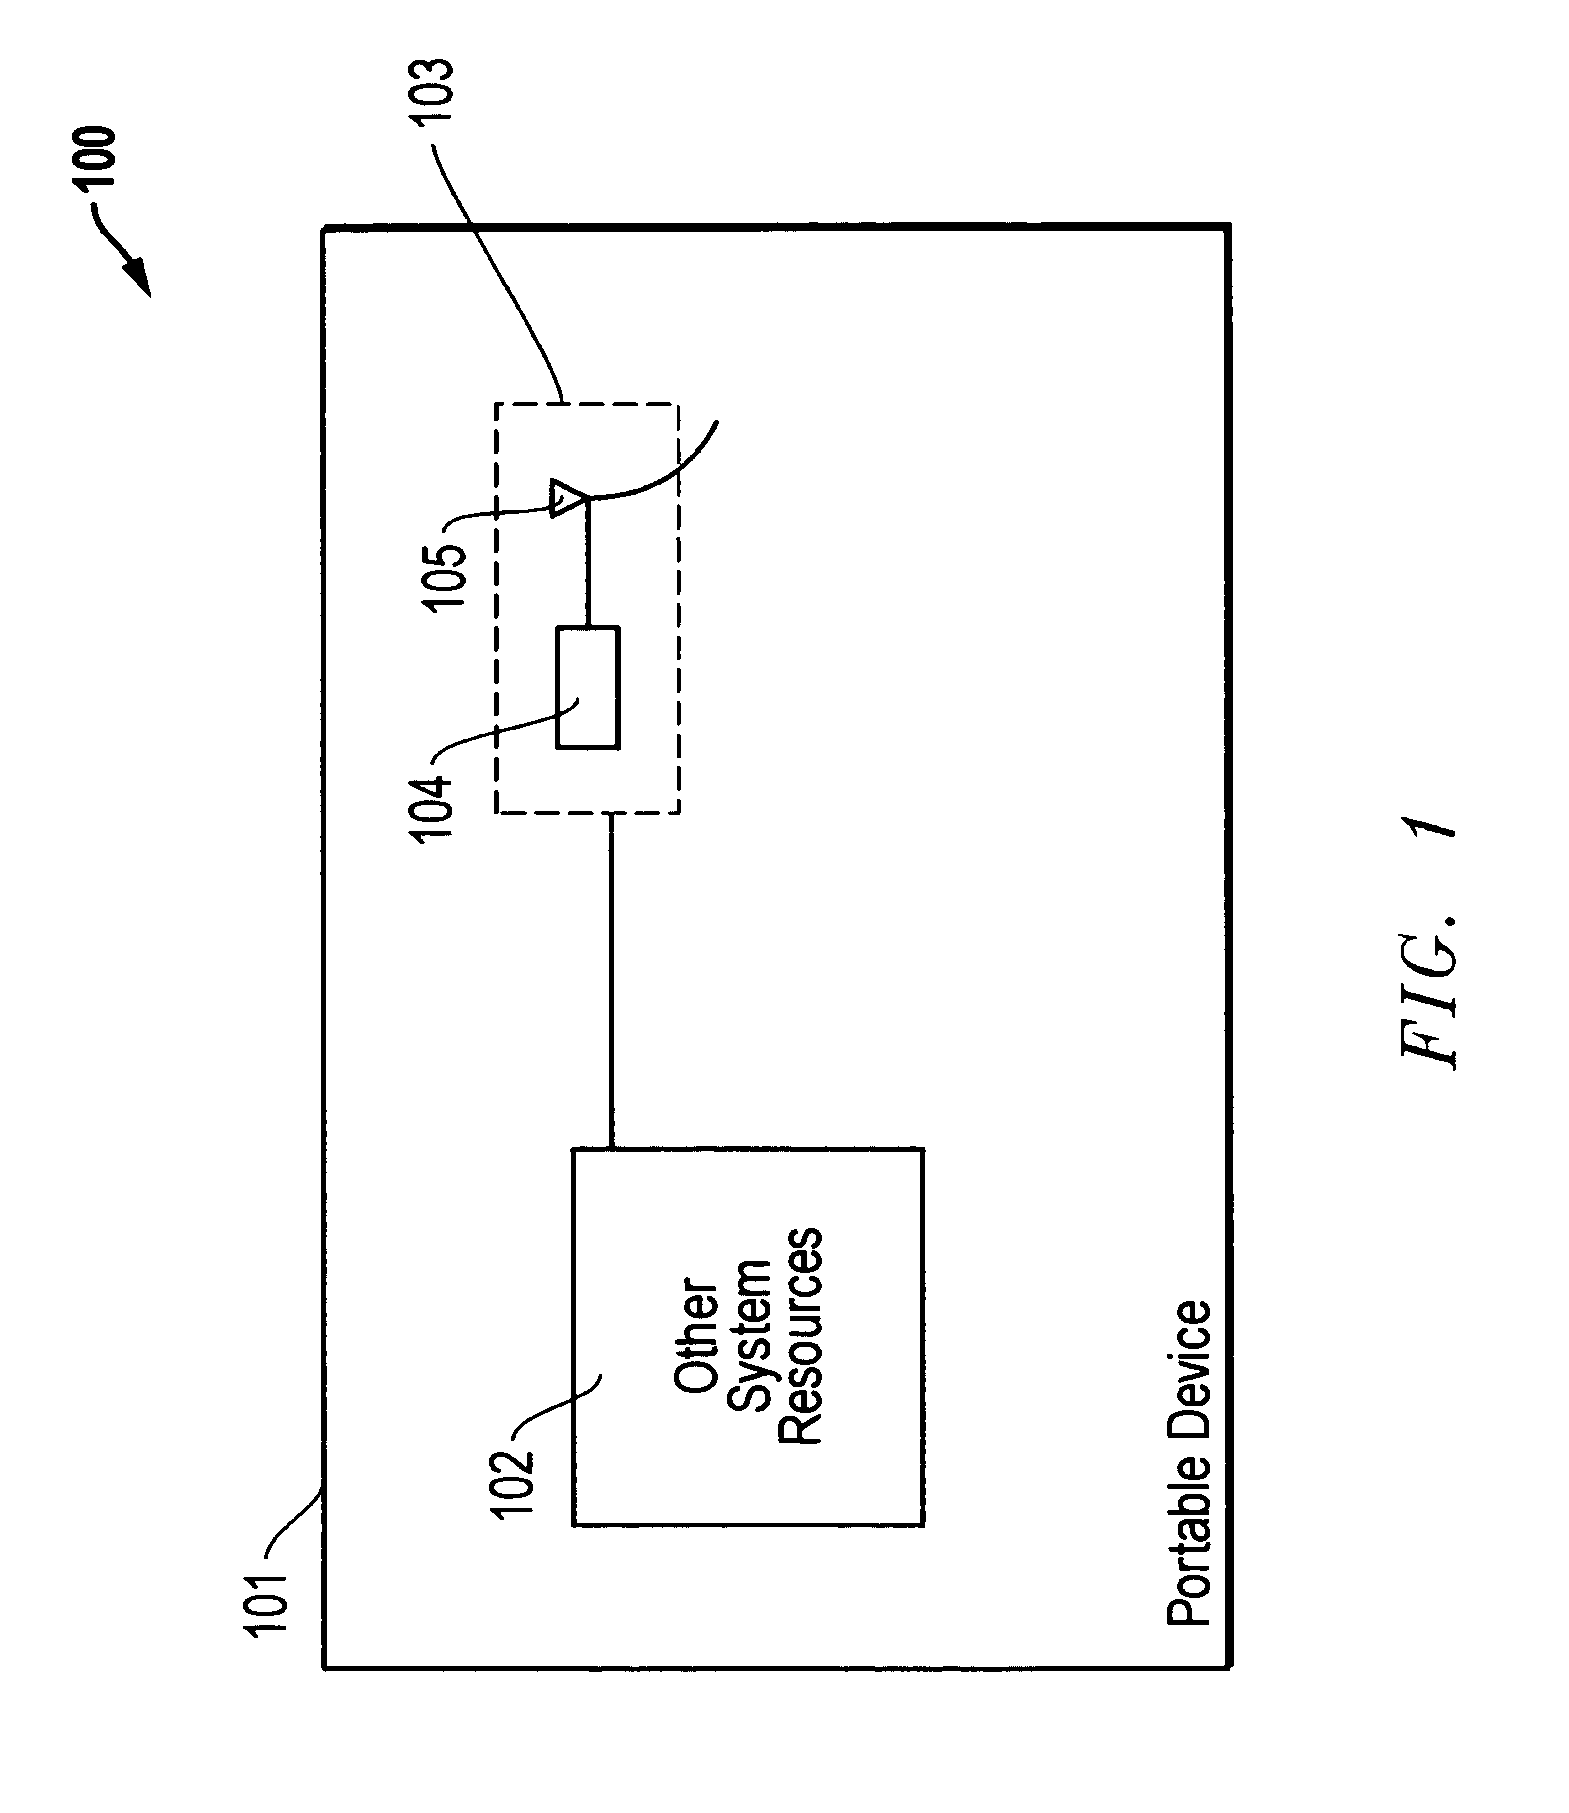 System and method for antenna resource management in non-harmonized RF spectrum